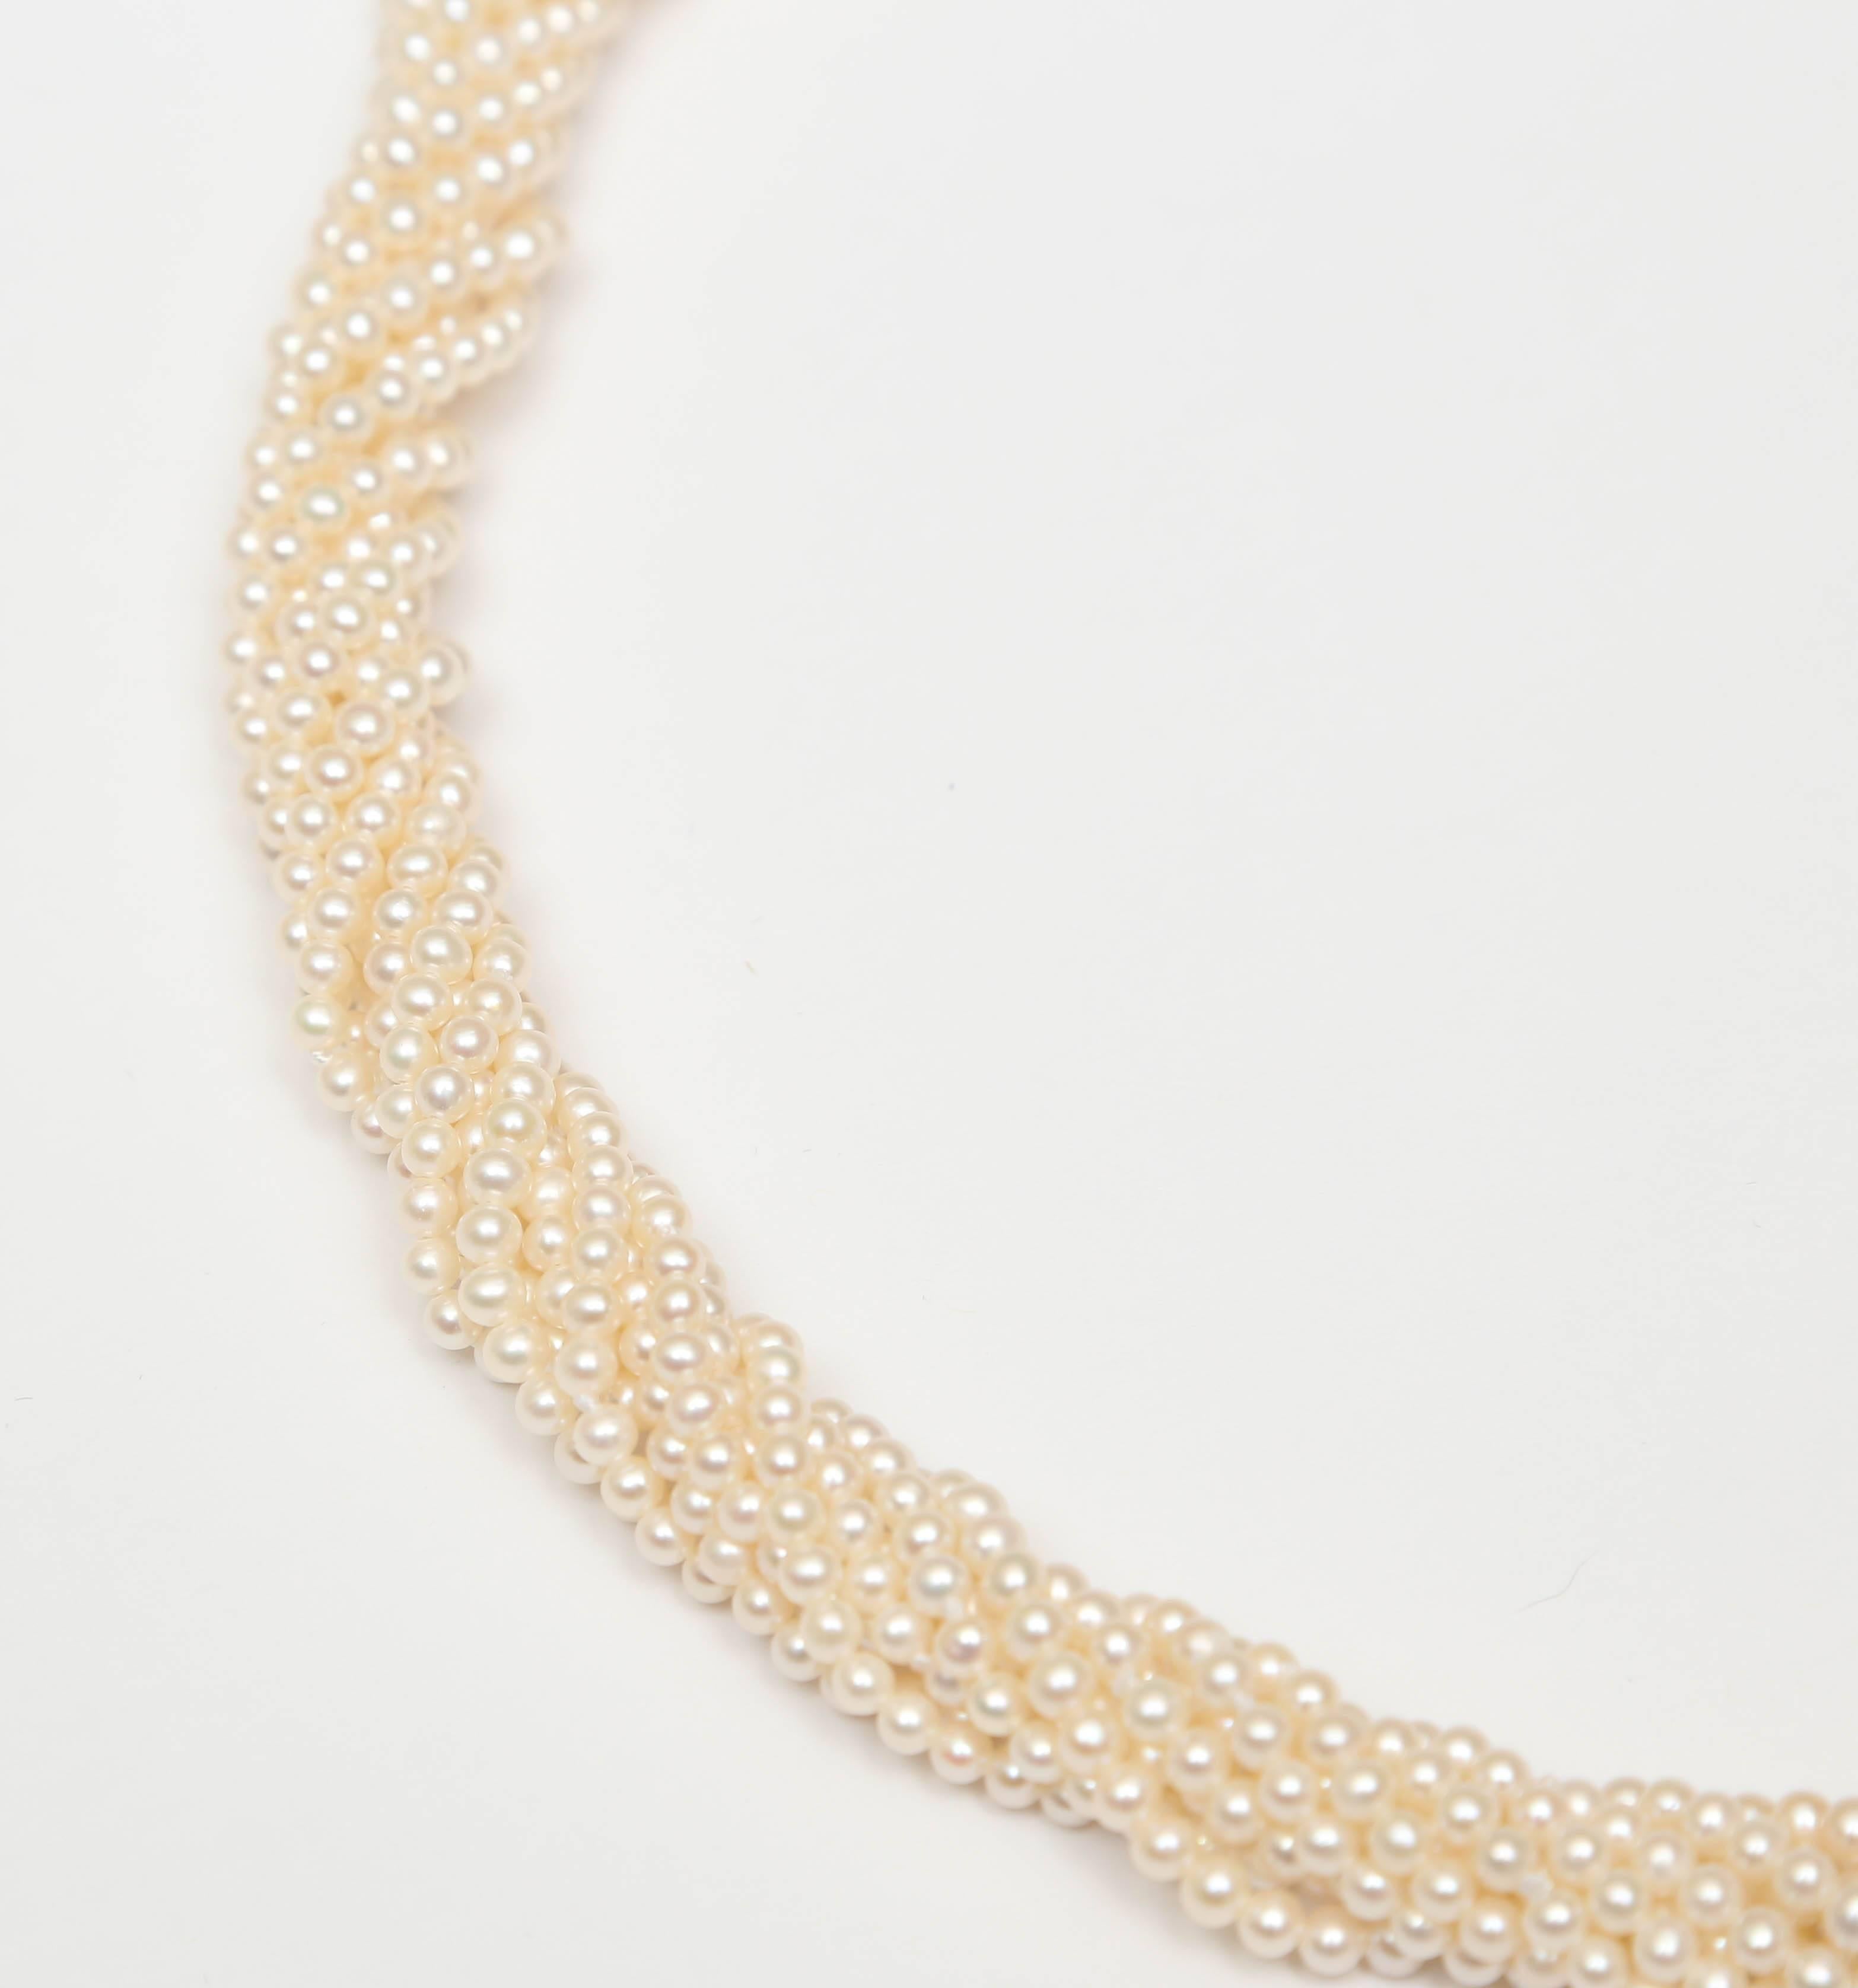 Nine Strand Cultured Pearl Necklace with Jaguar Gold and Diamond Clasp 1